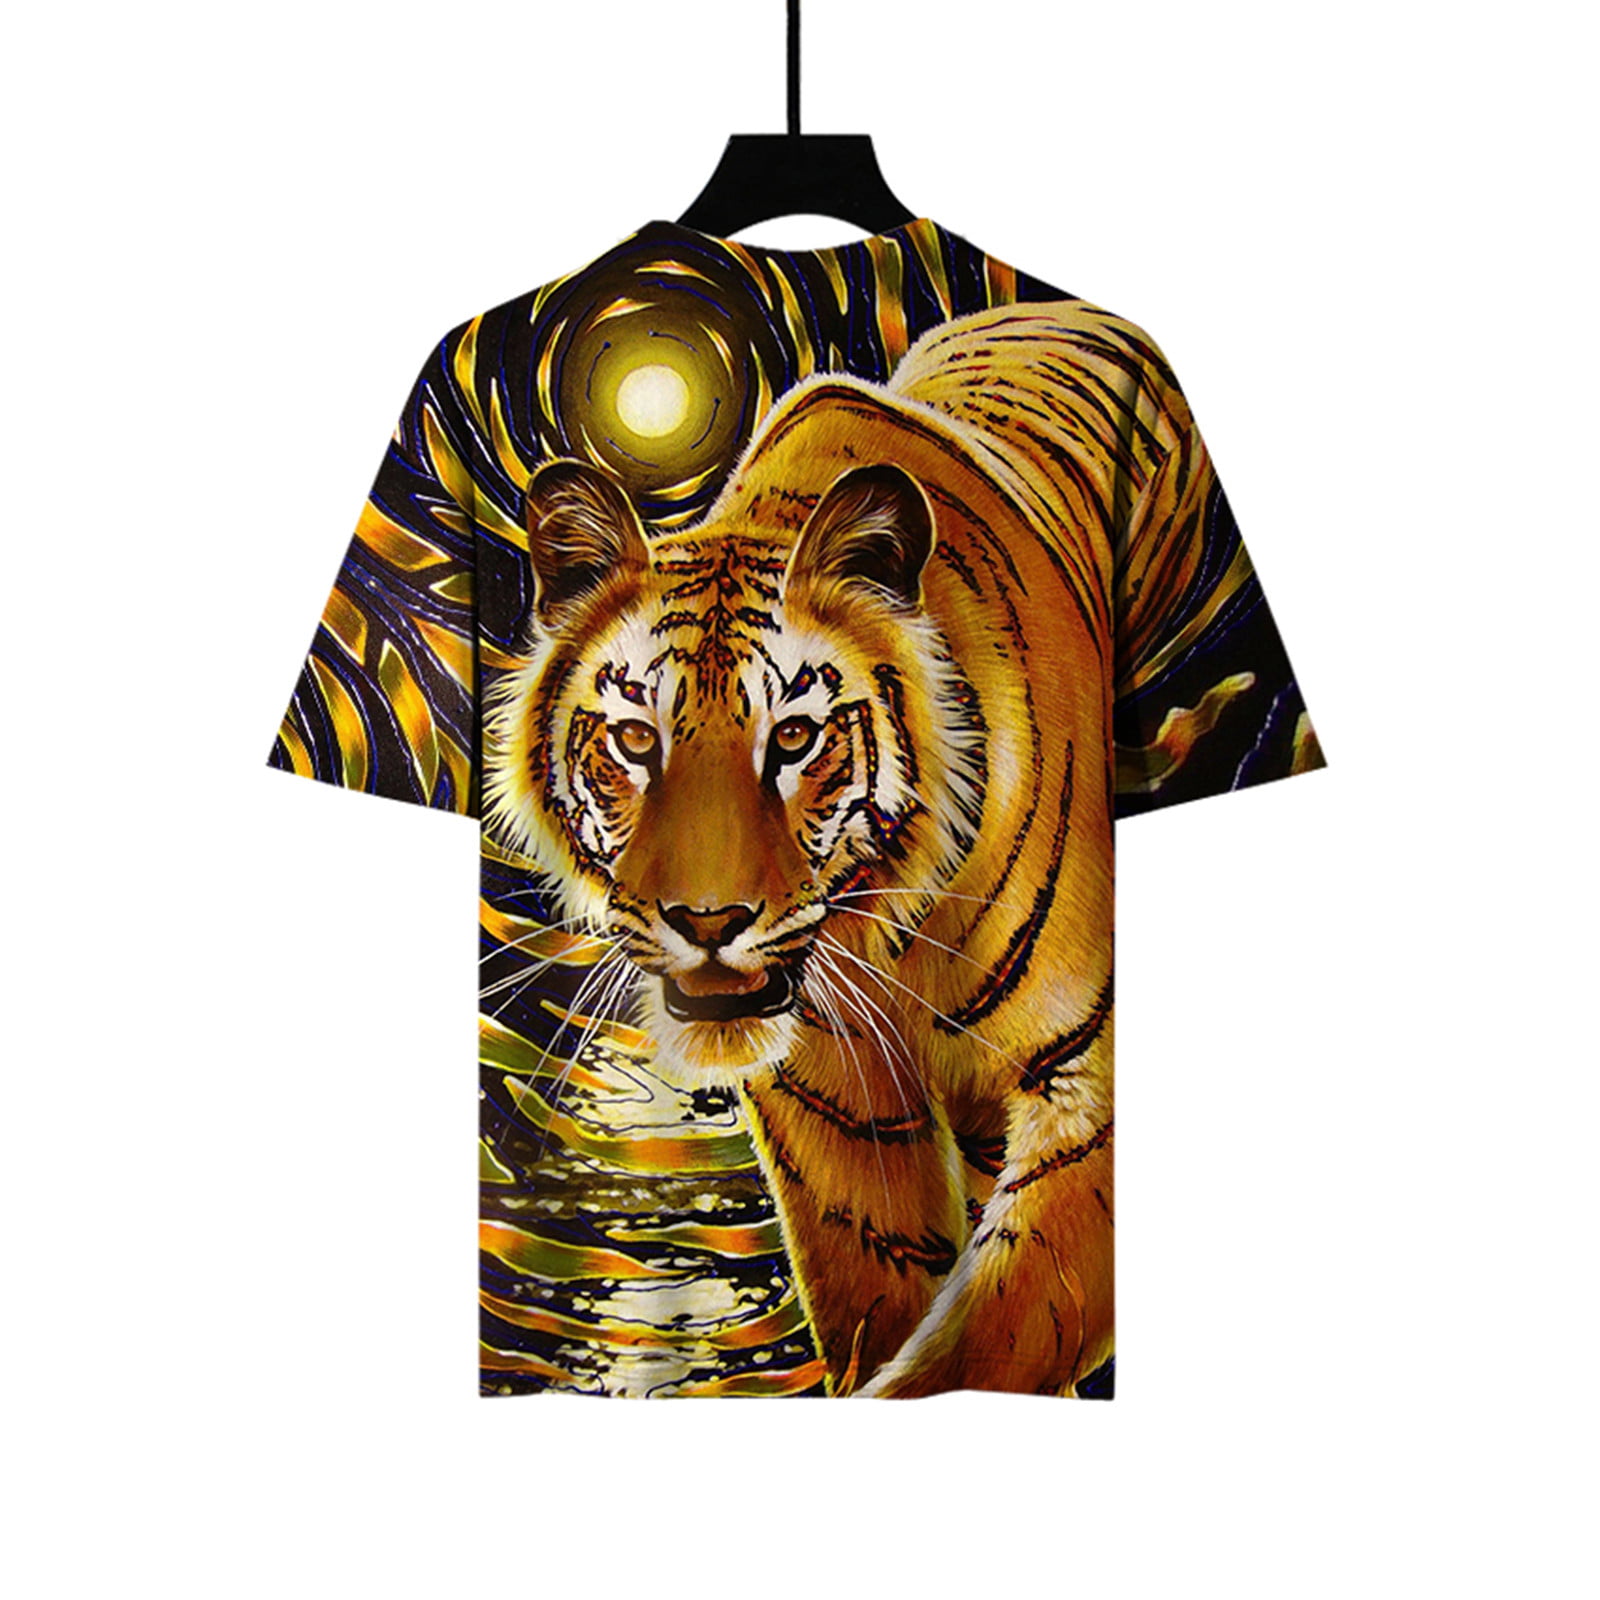  Men's T-Shirt 3D Printed Tiger Print 3Dt Shirts Short Sleeve  Casual Men's and Women's T-Shirts-S : Clothing, Shoes & Jewelry